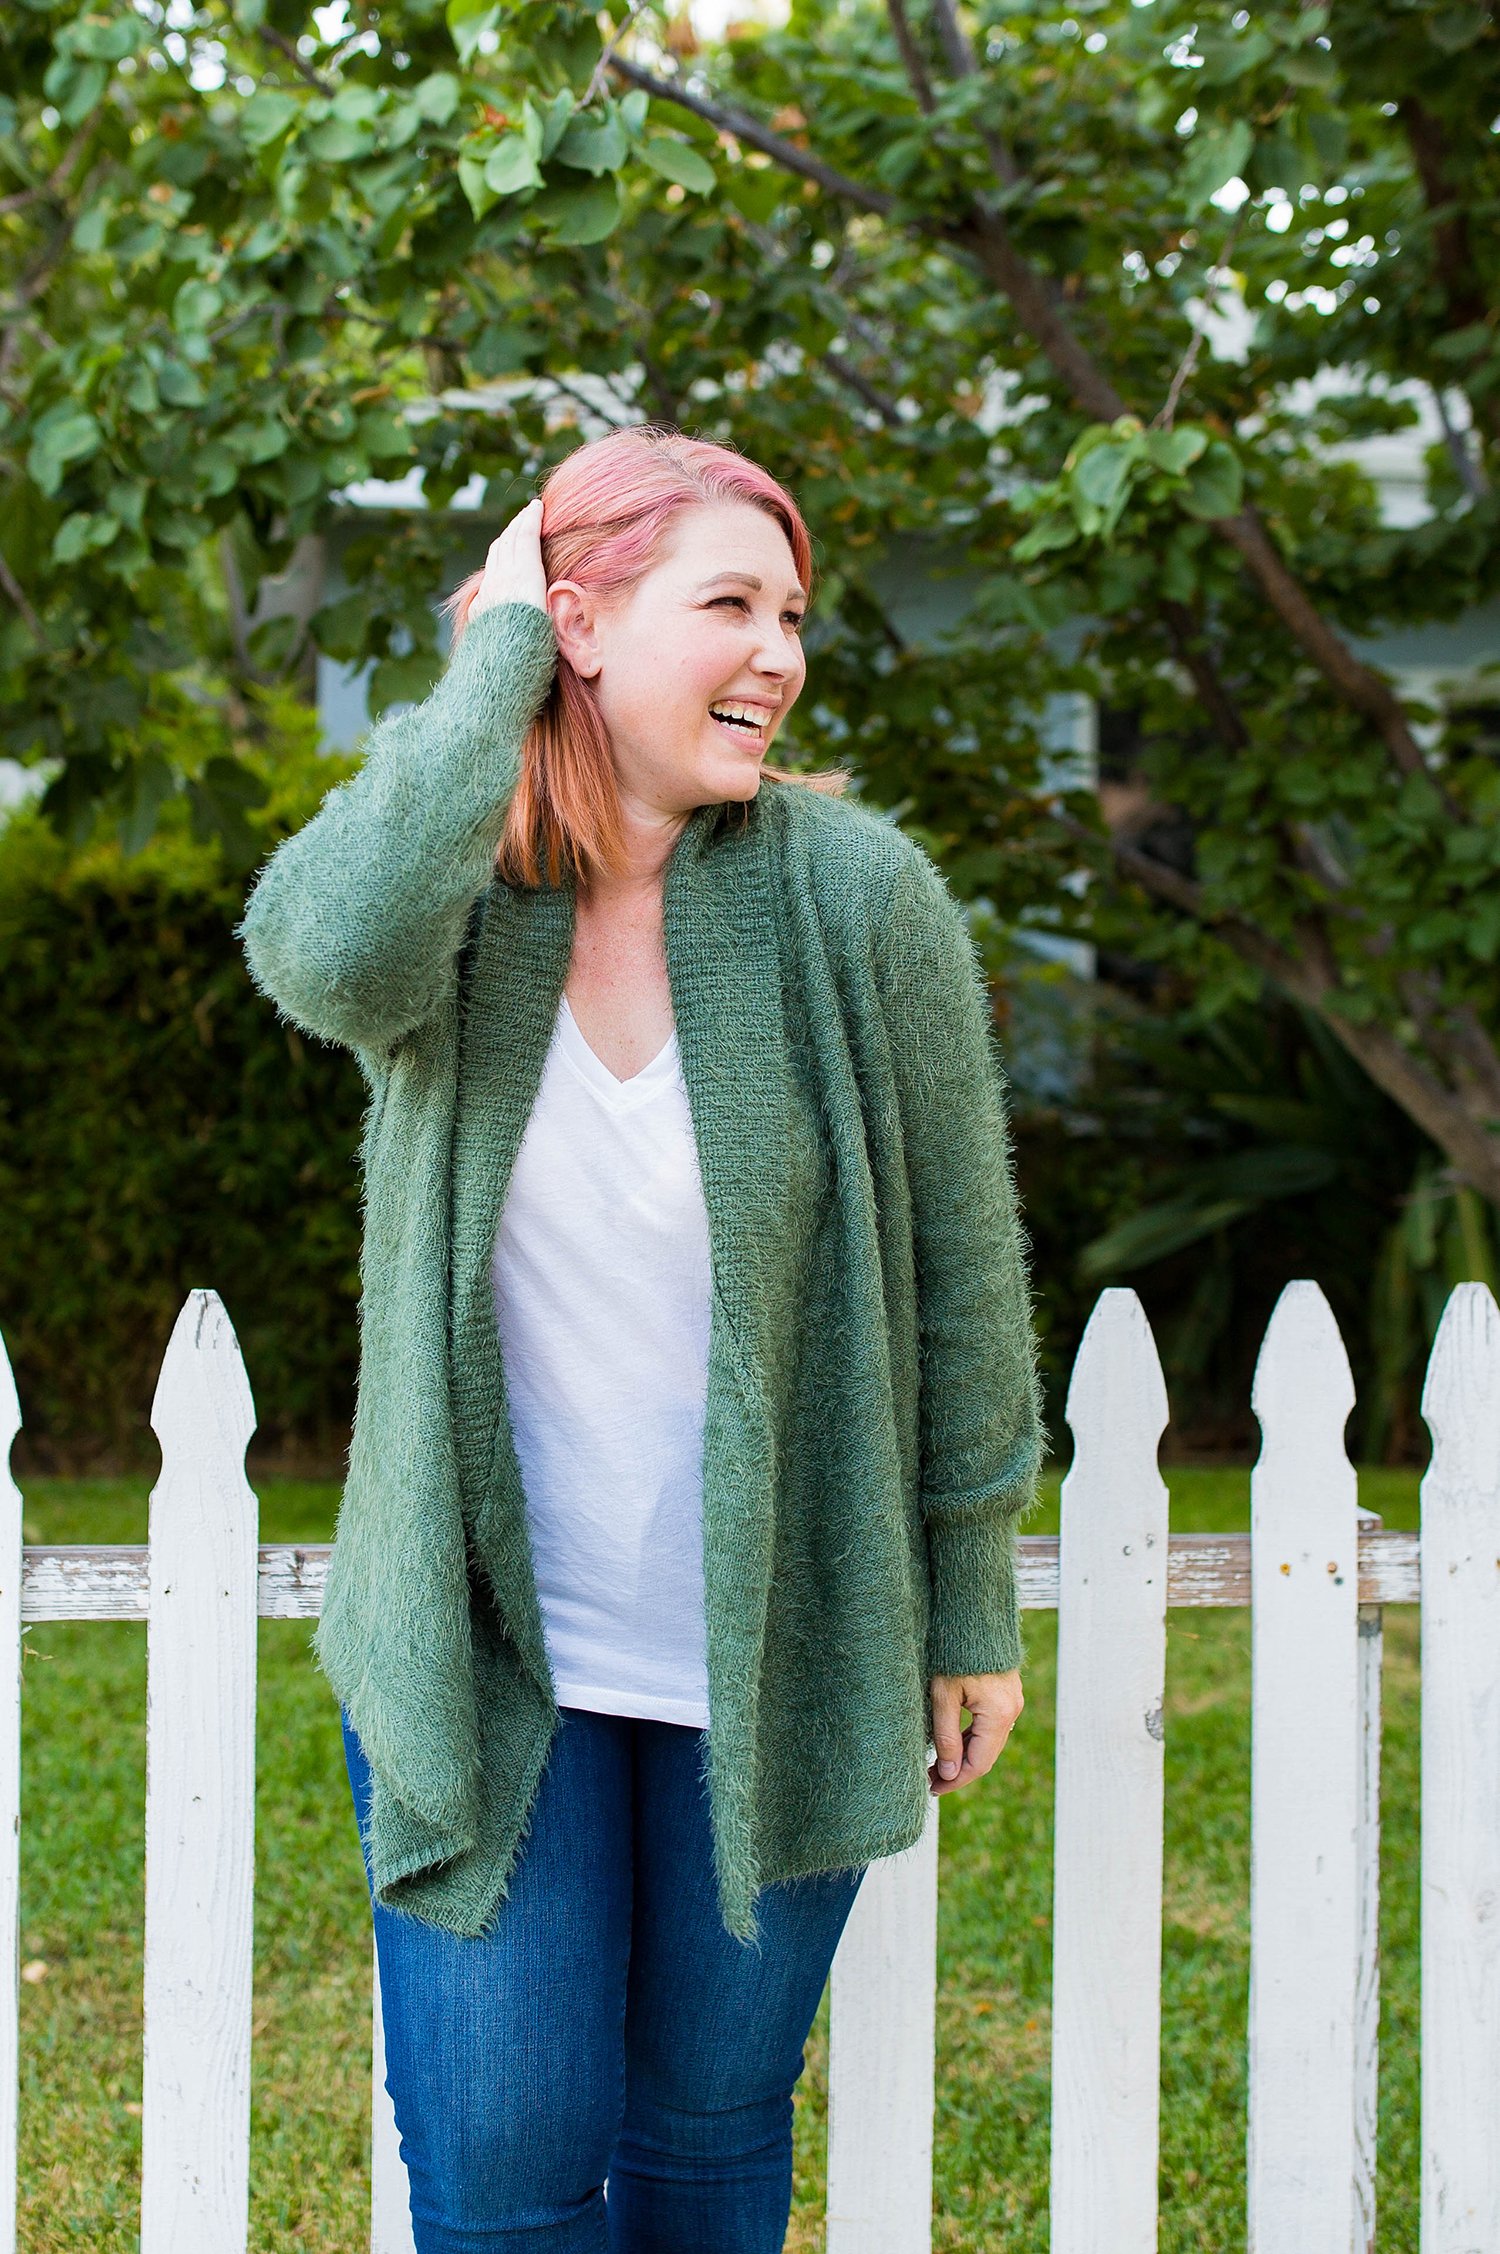 Amazon Prime Wardrobe: Have you tried it yet? I love this soft green cardigan!